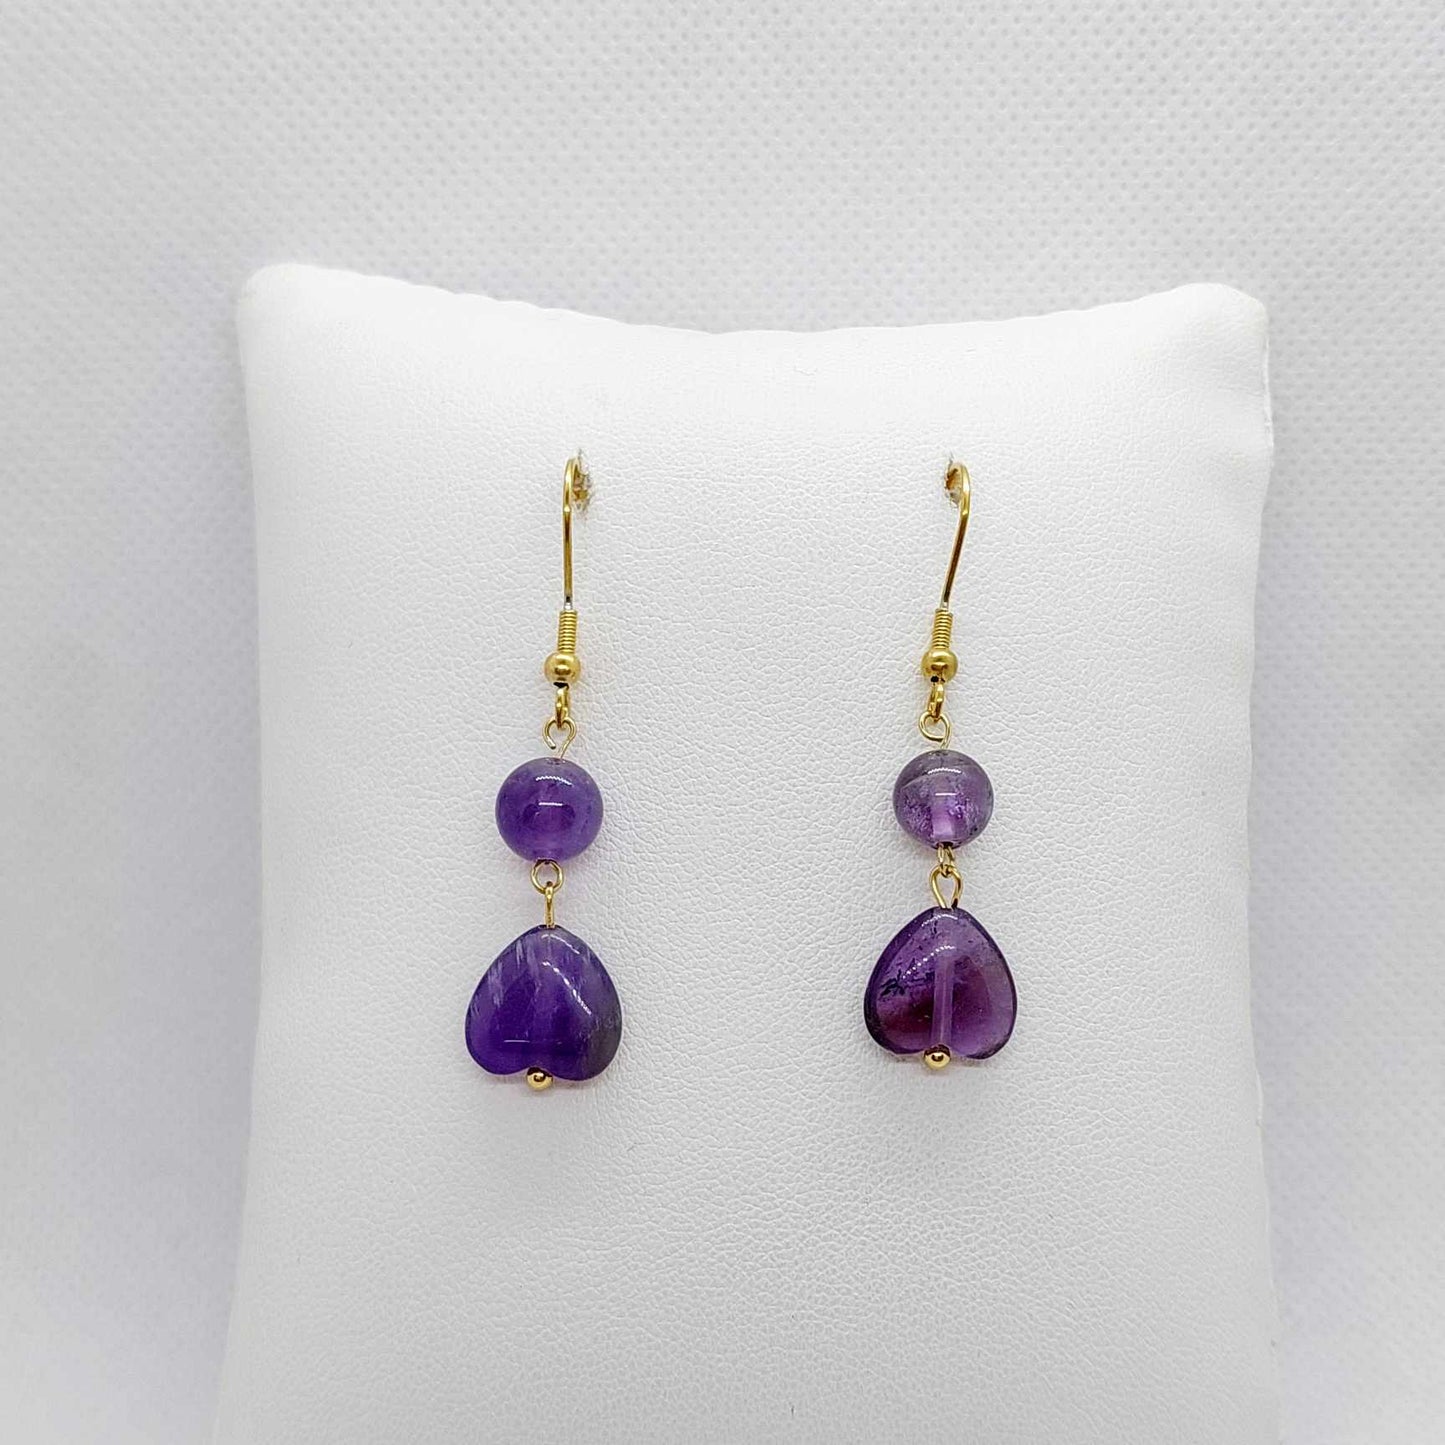 Natural Amethyst Dangle Earrings in Stainless Steel Gold Plated